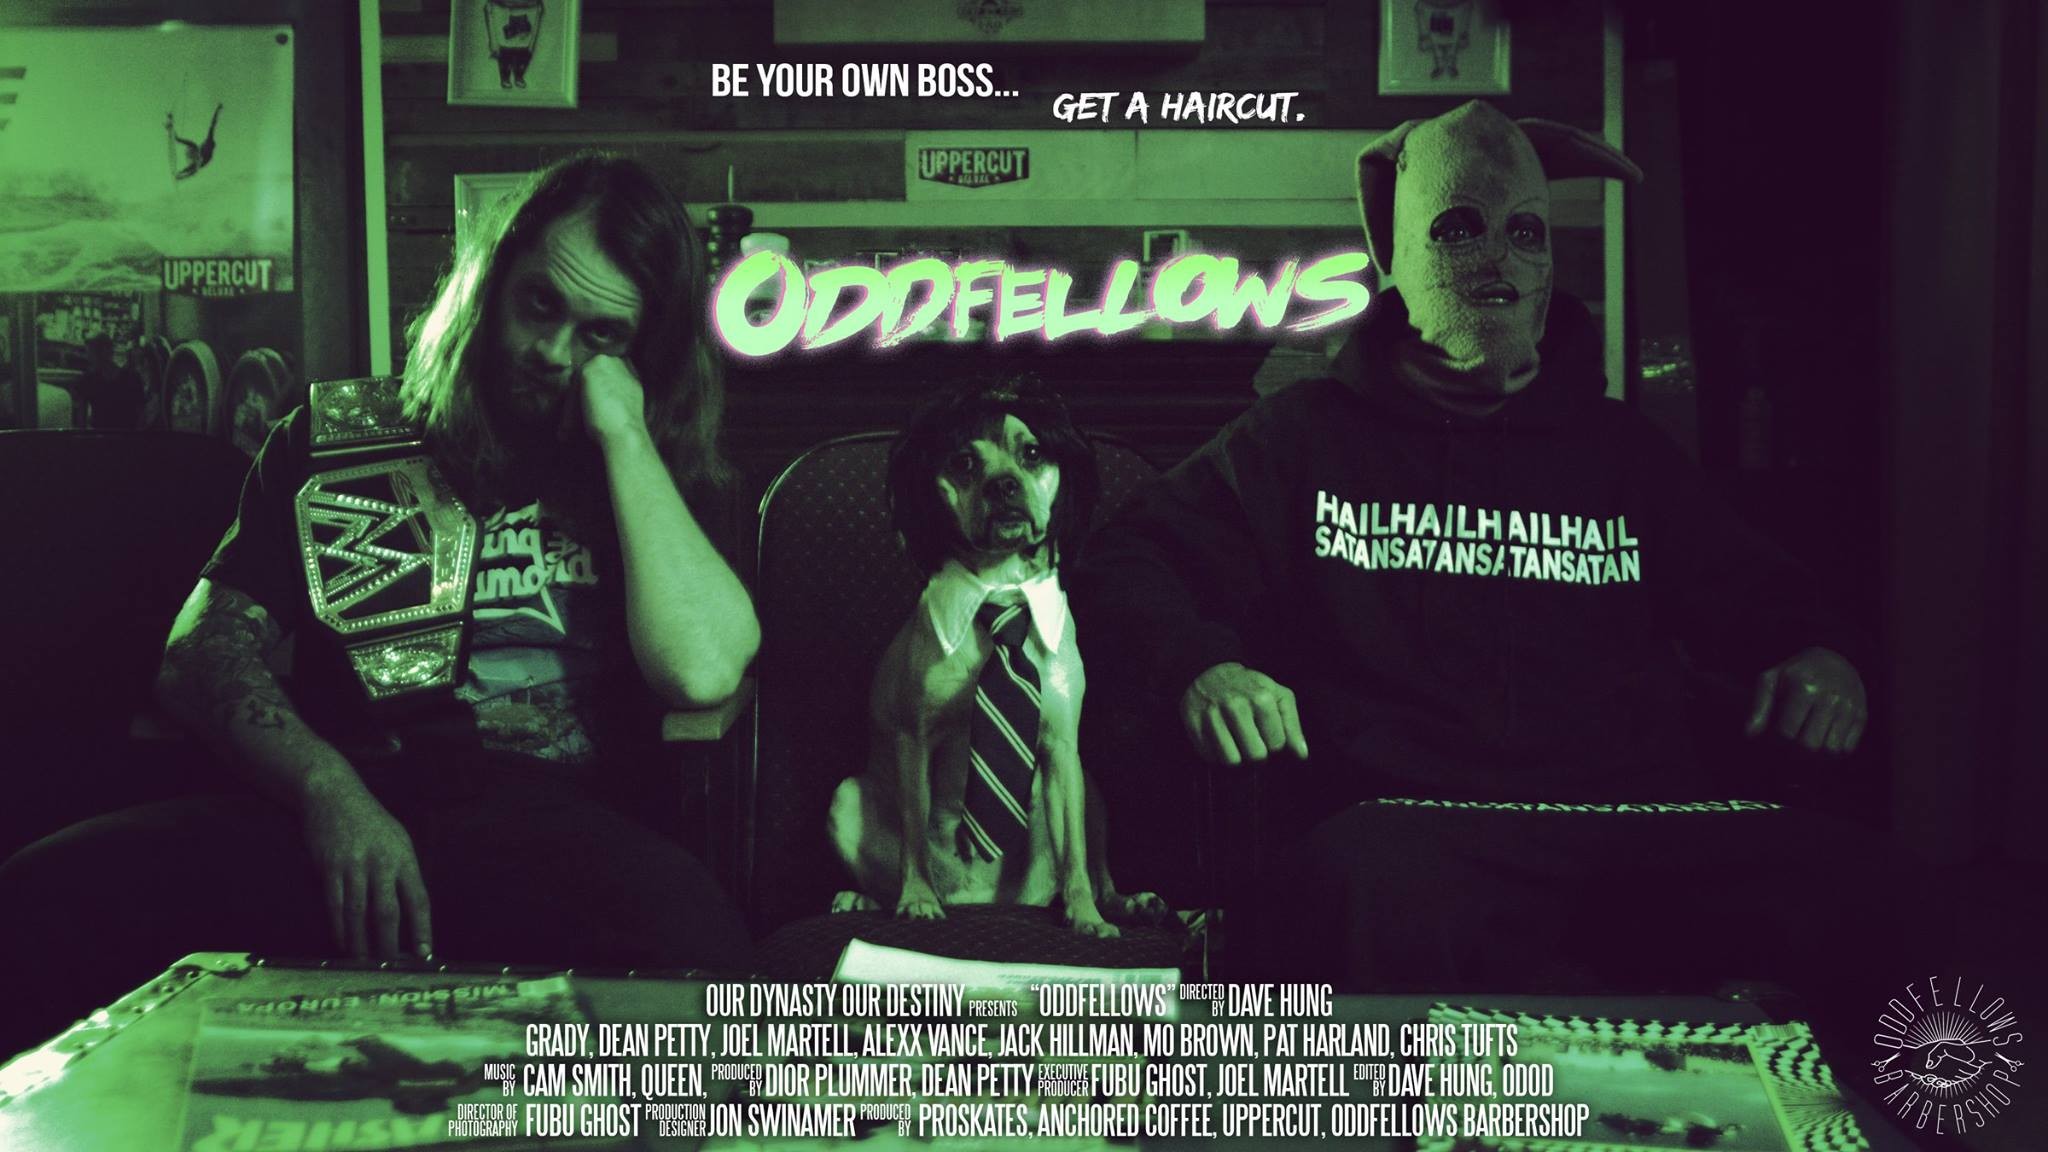 Oddfellows short film to screen this Friday